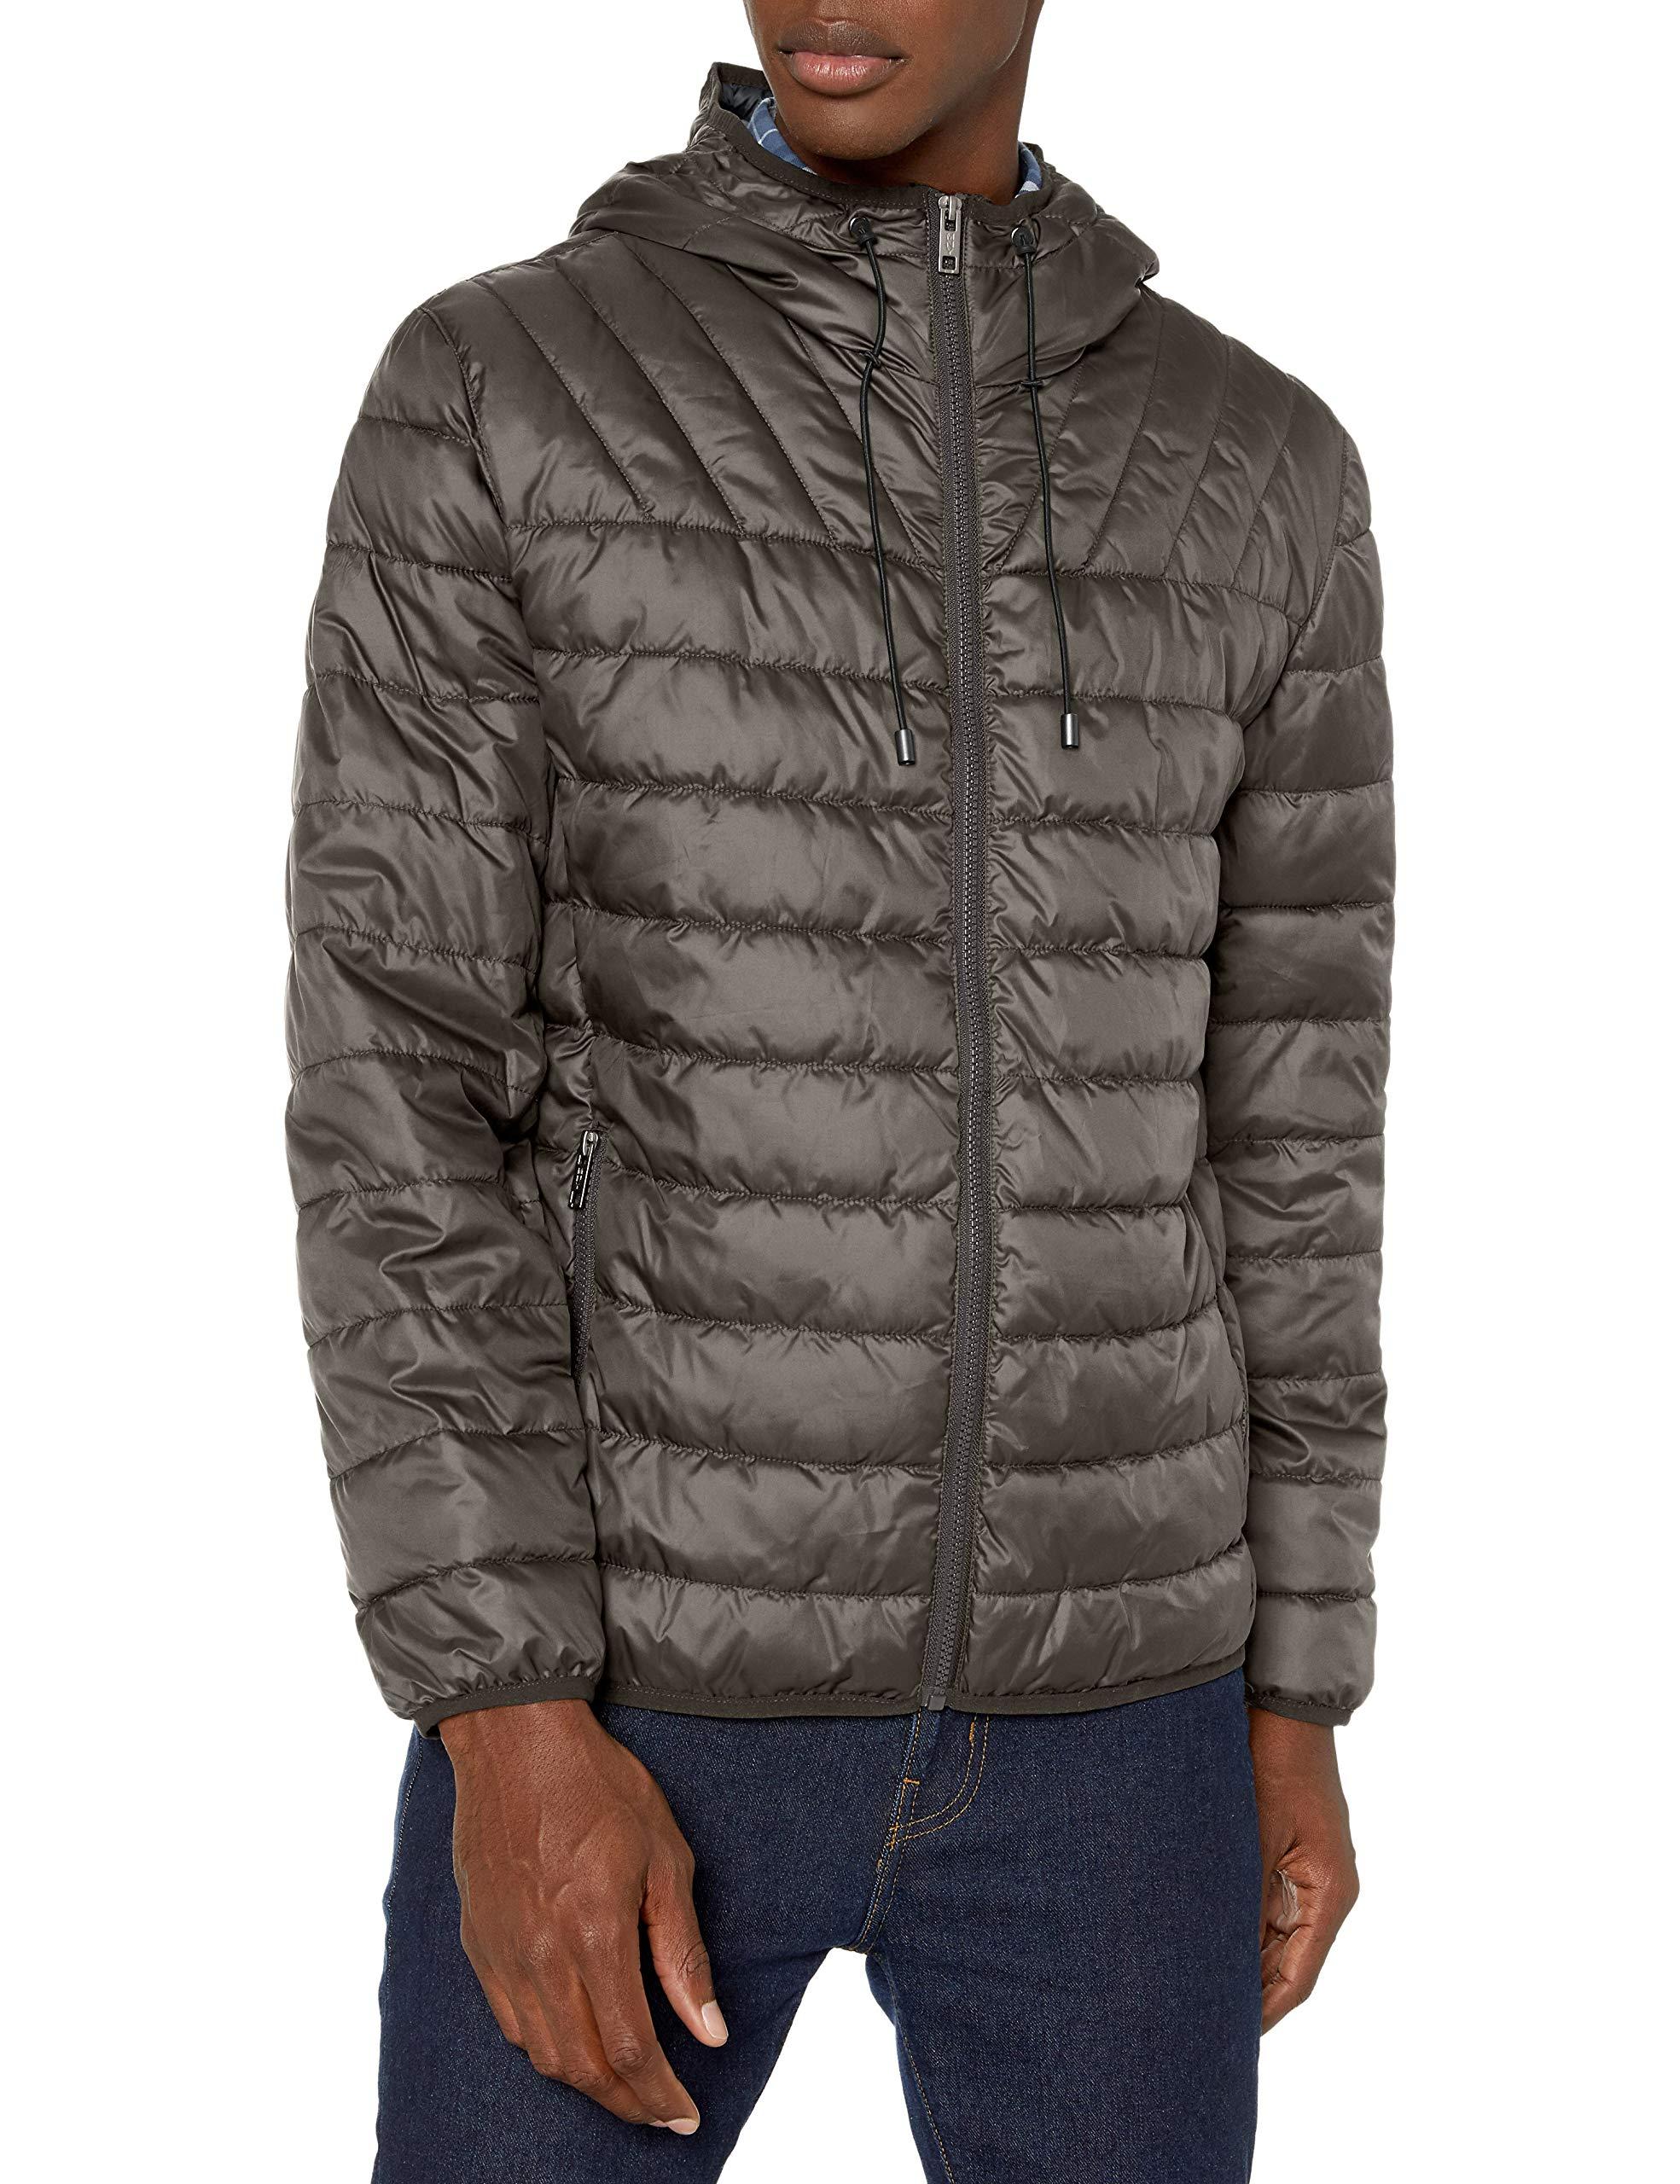 Marc New York Synthetic Dunmore Hooded Puffer Jacket in Gray for Men - Lyst